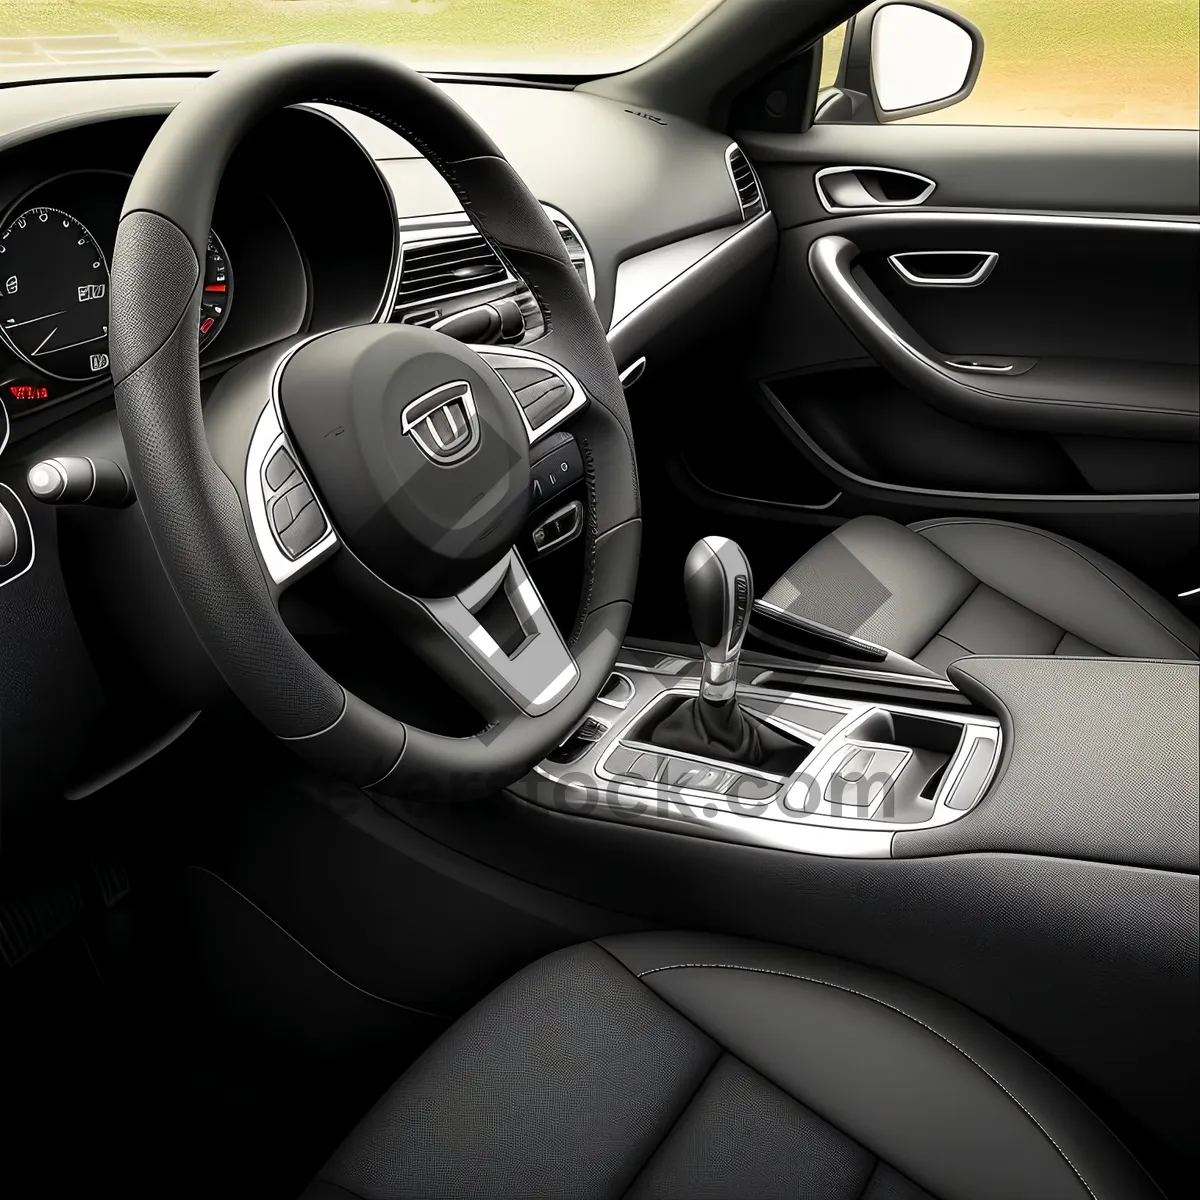 Picture of Modern Car Interior with Advanced Dashboard and Steering Wheel